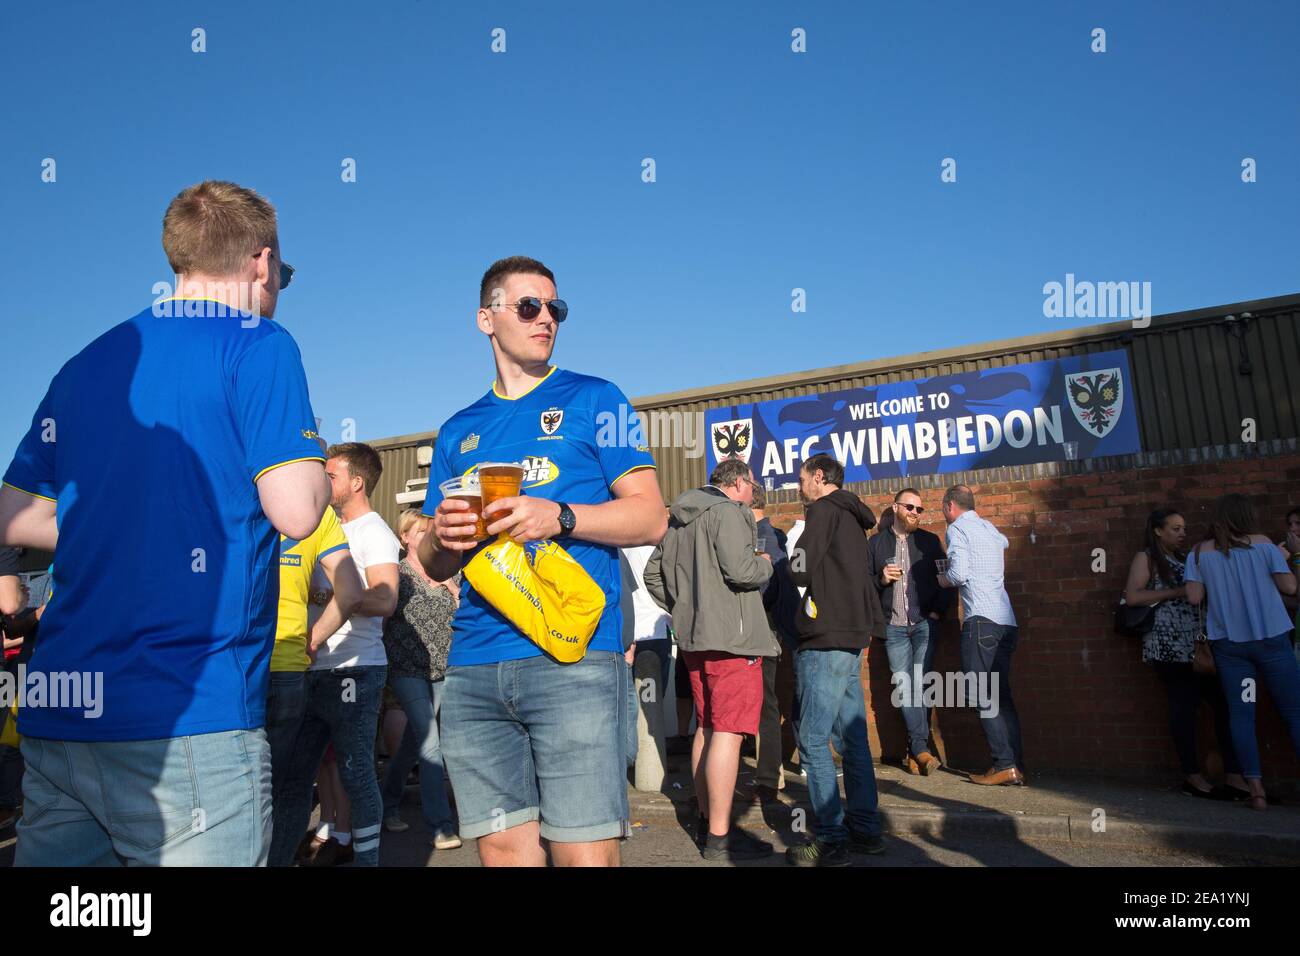 AFC Wimbledon fans drinking beer before the game at AFC Wimbledon football club, England. Stock Photo